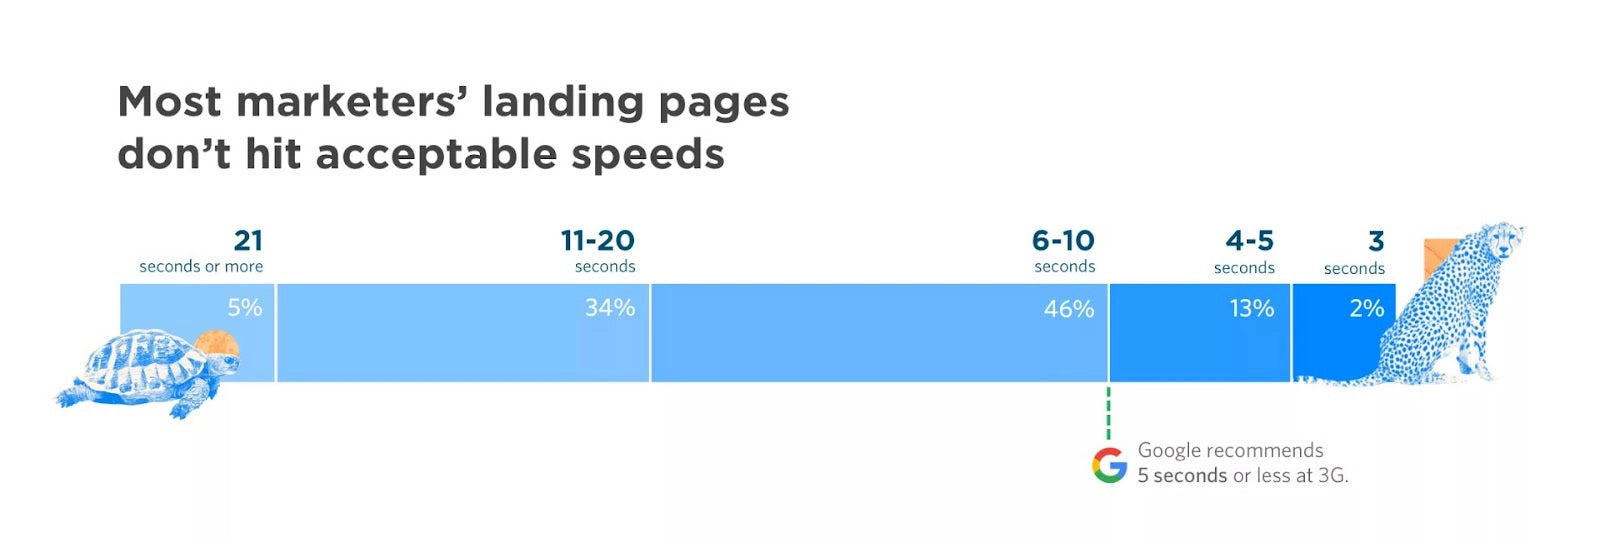 Results for landing page speed in a study by Unbounce